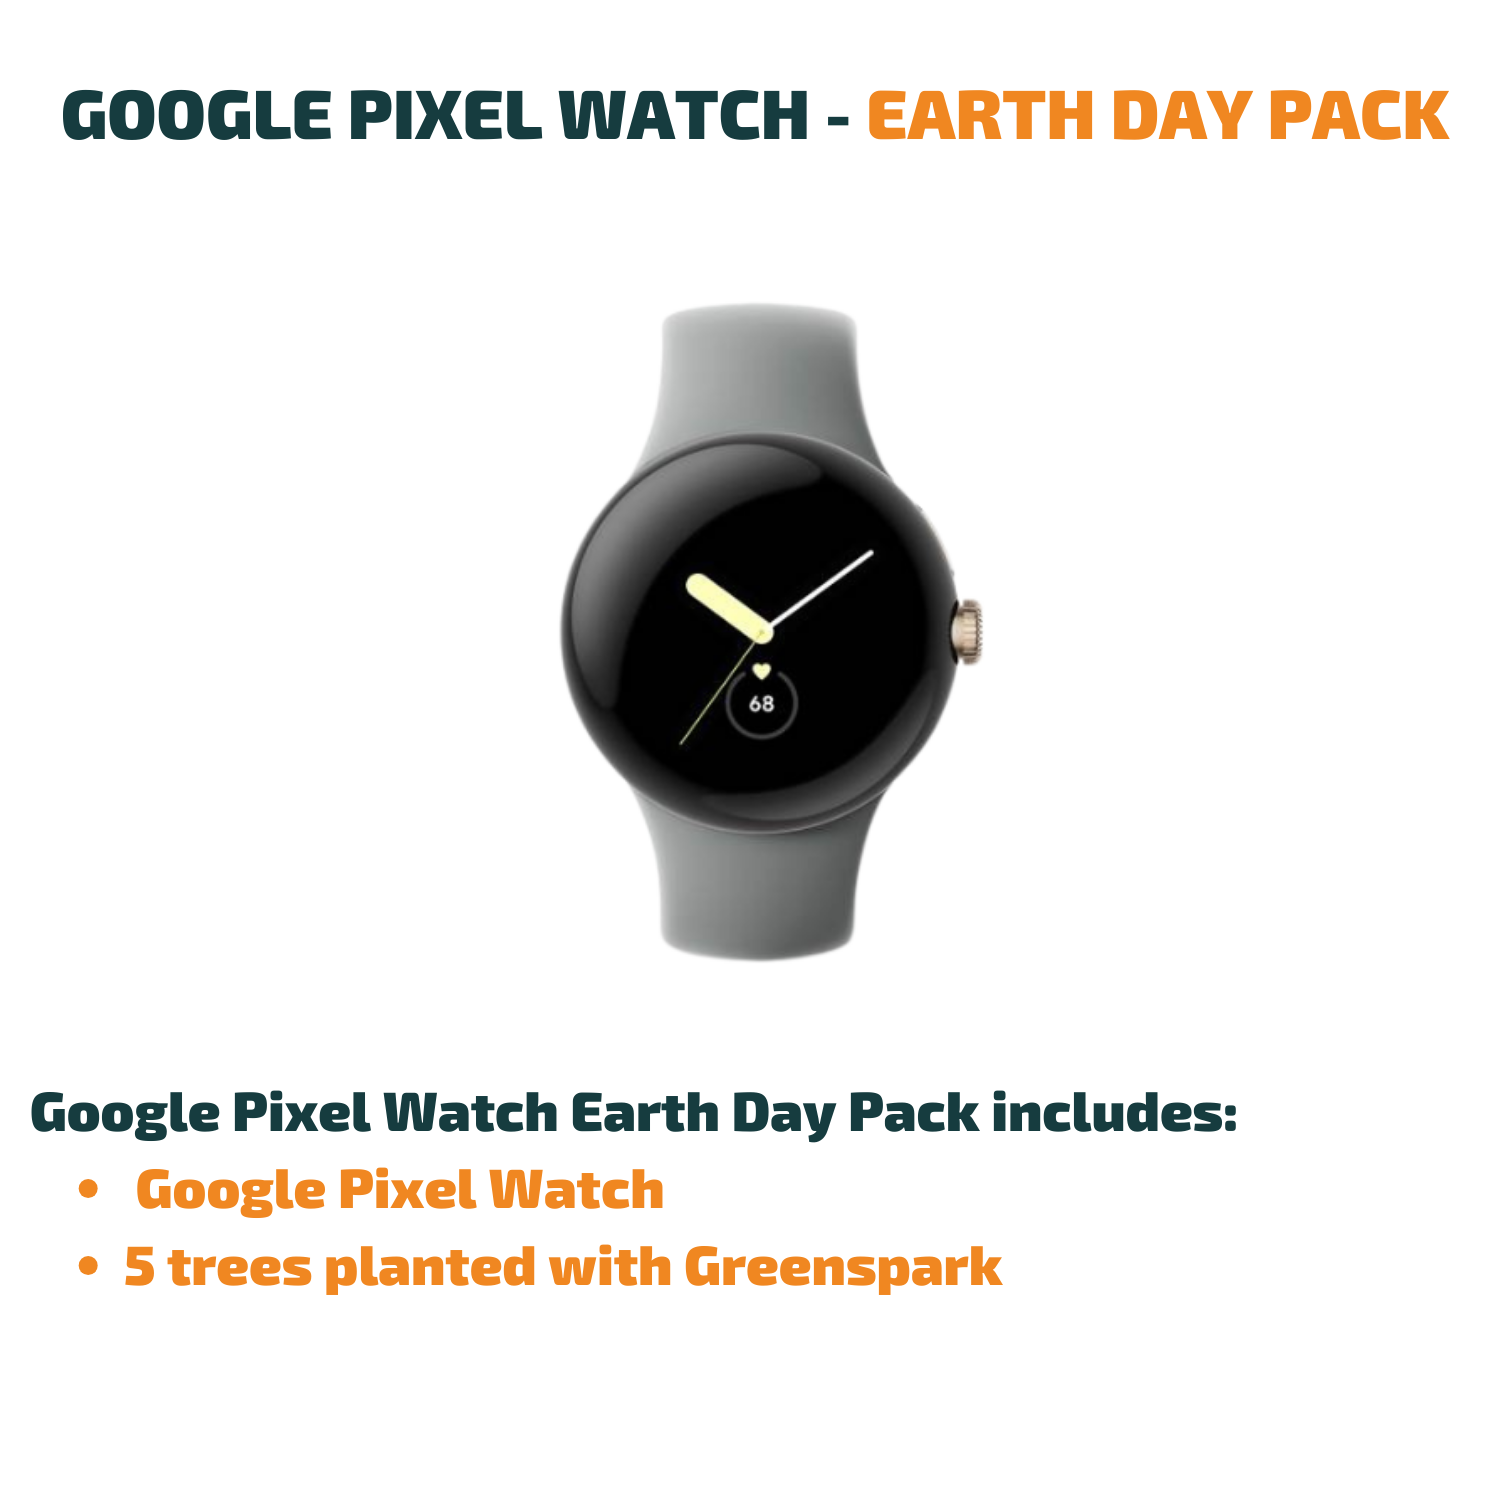 Google Pixel Watch - Earth Day Pack